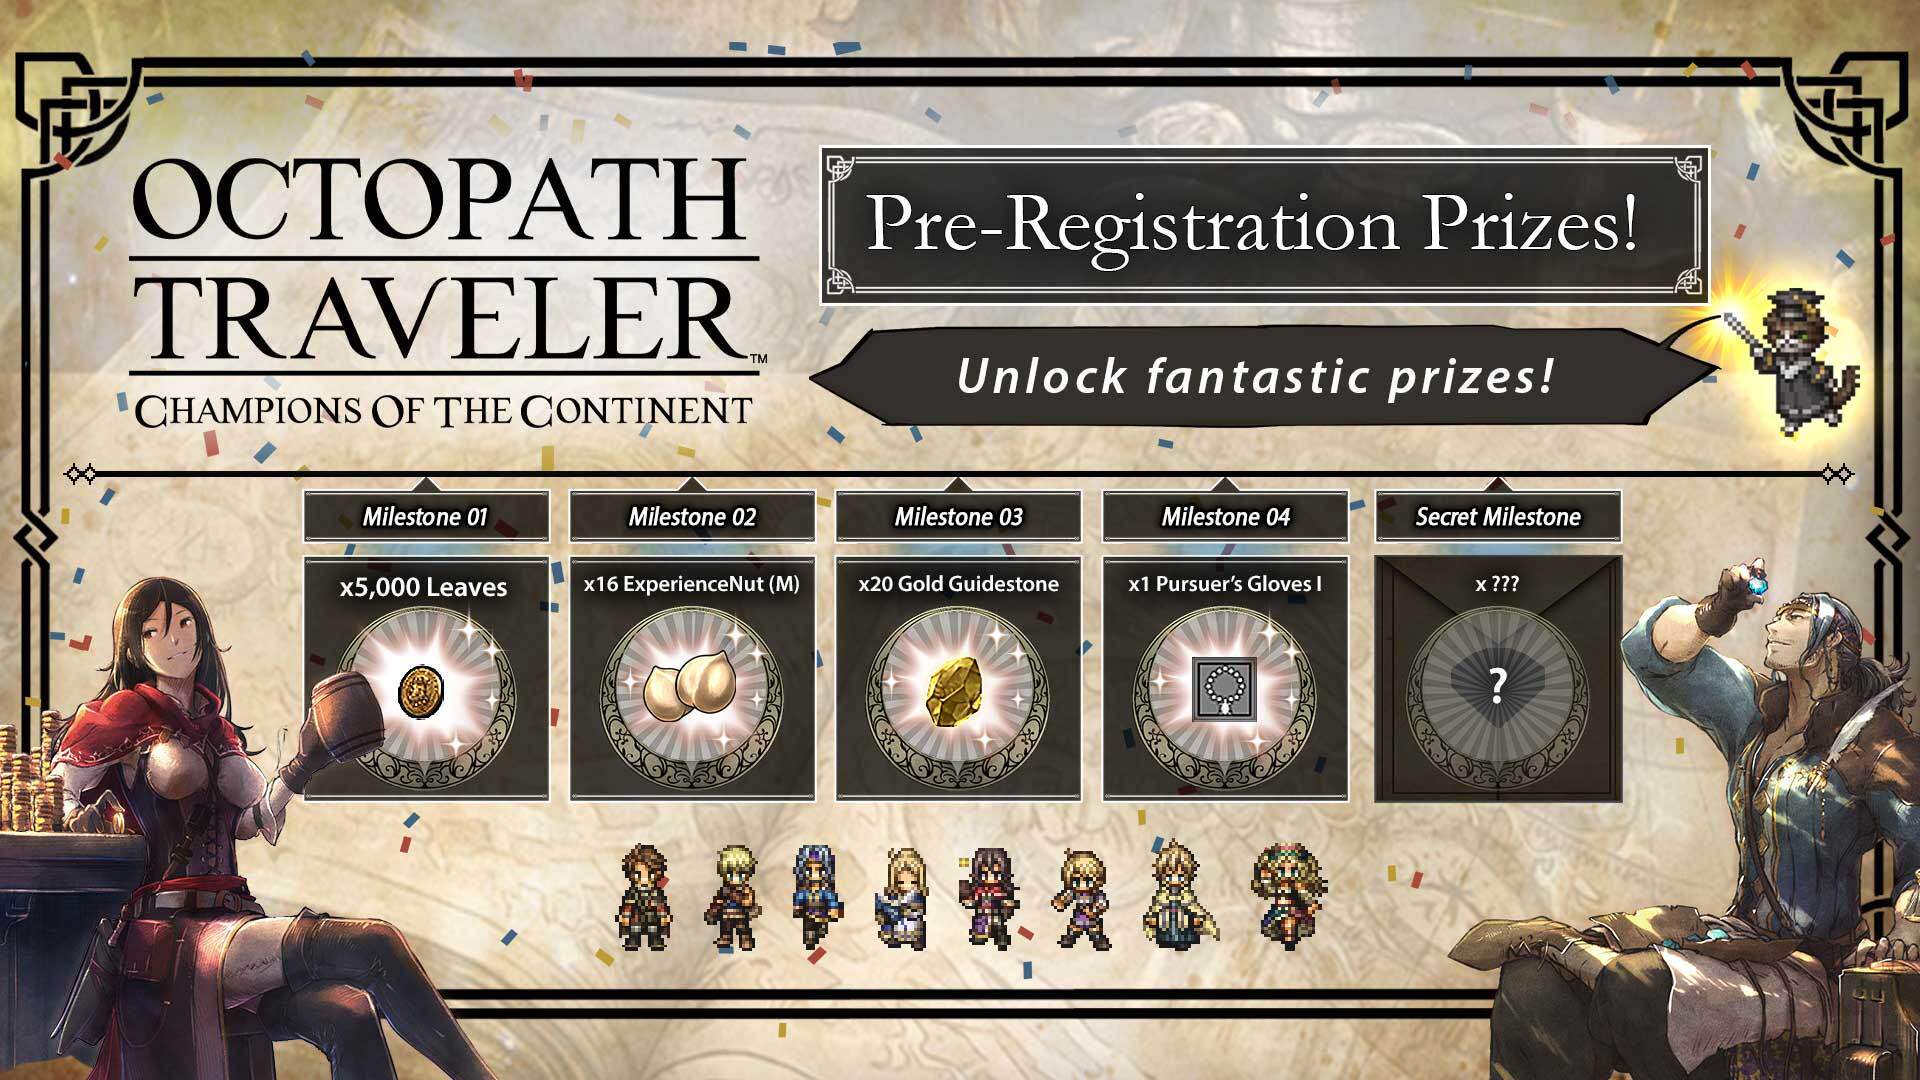 Various fabulous in-game rewards that players can receive by pre-registering on their App Store